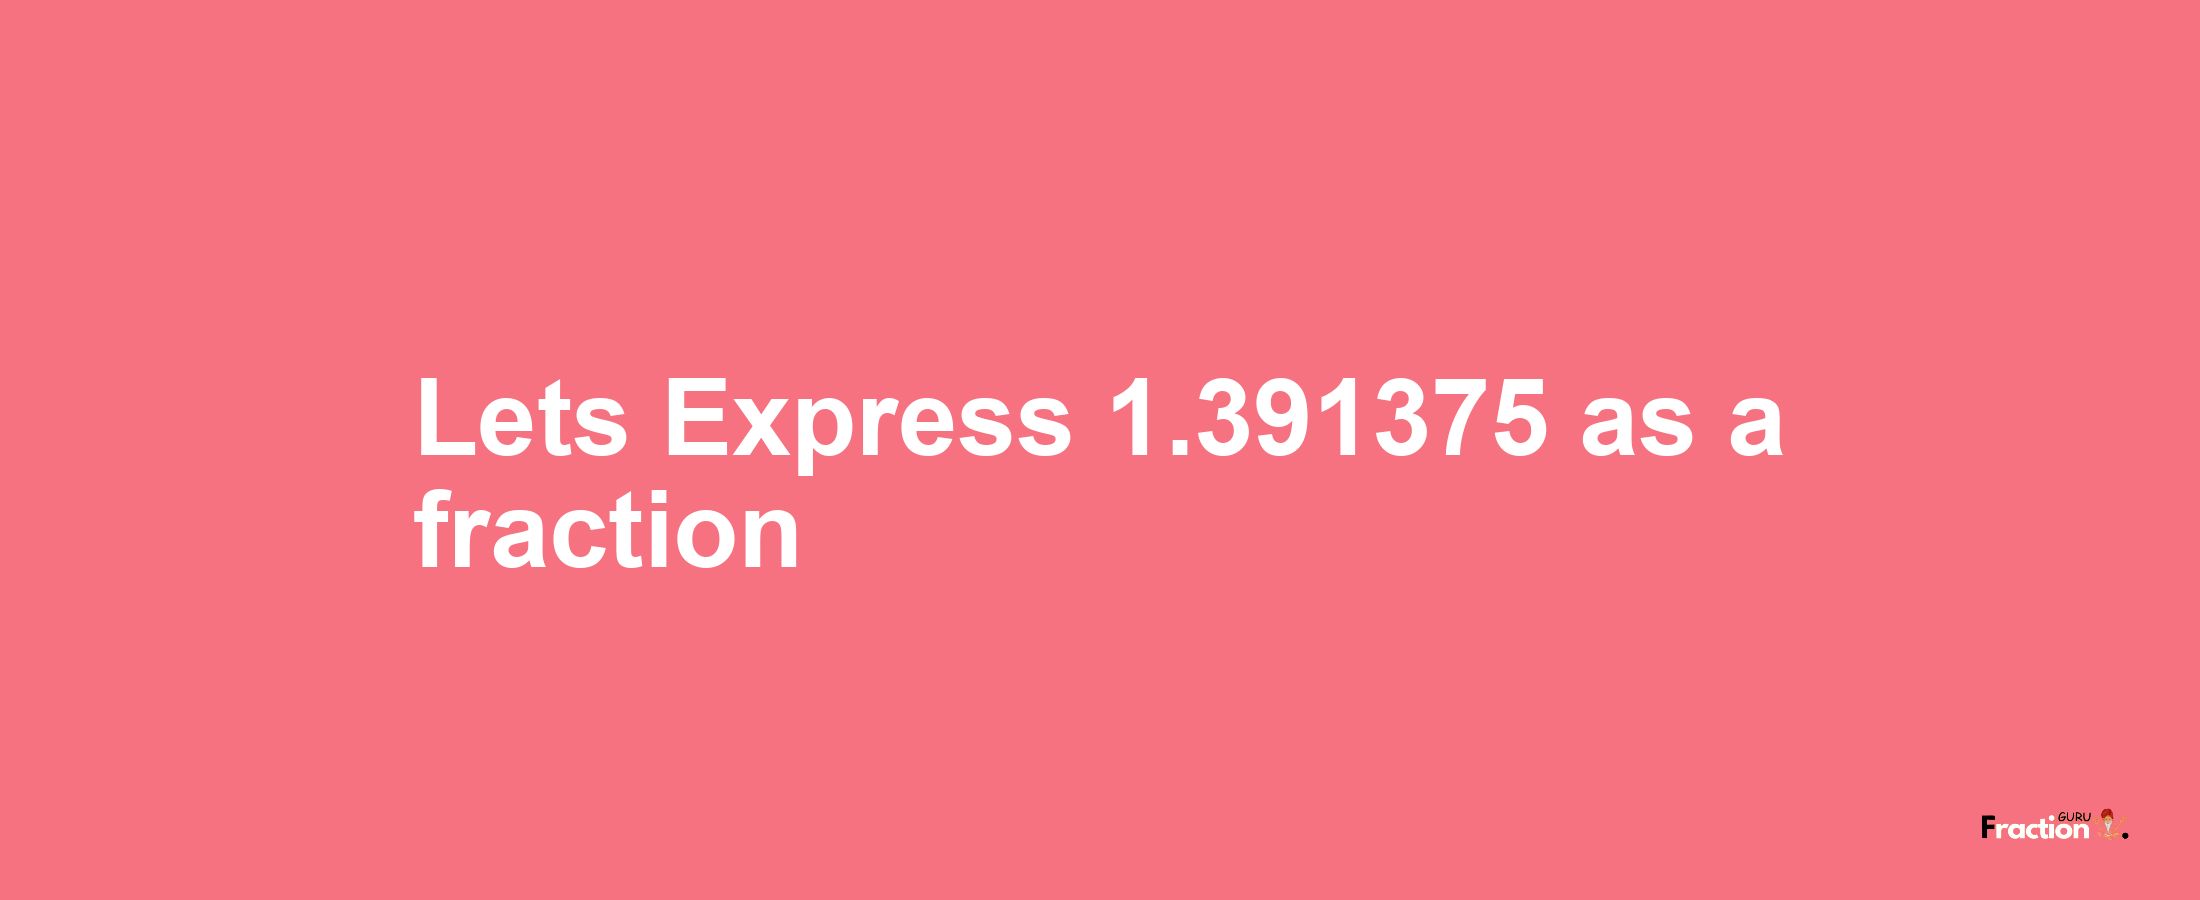 Lets Express 1.391375 as afraction